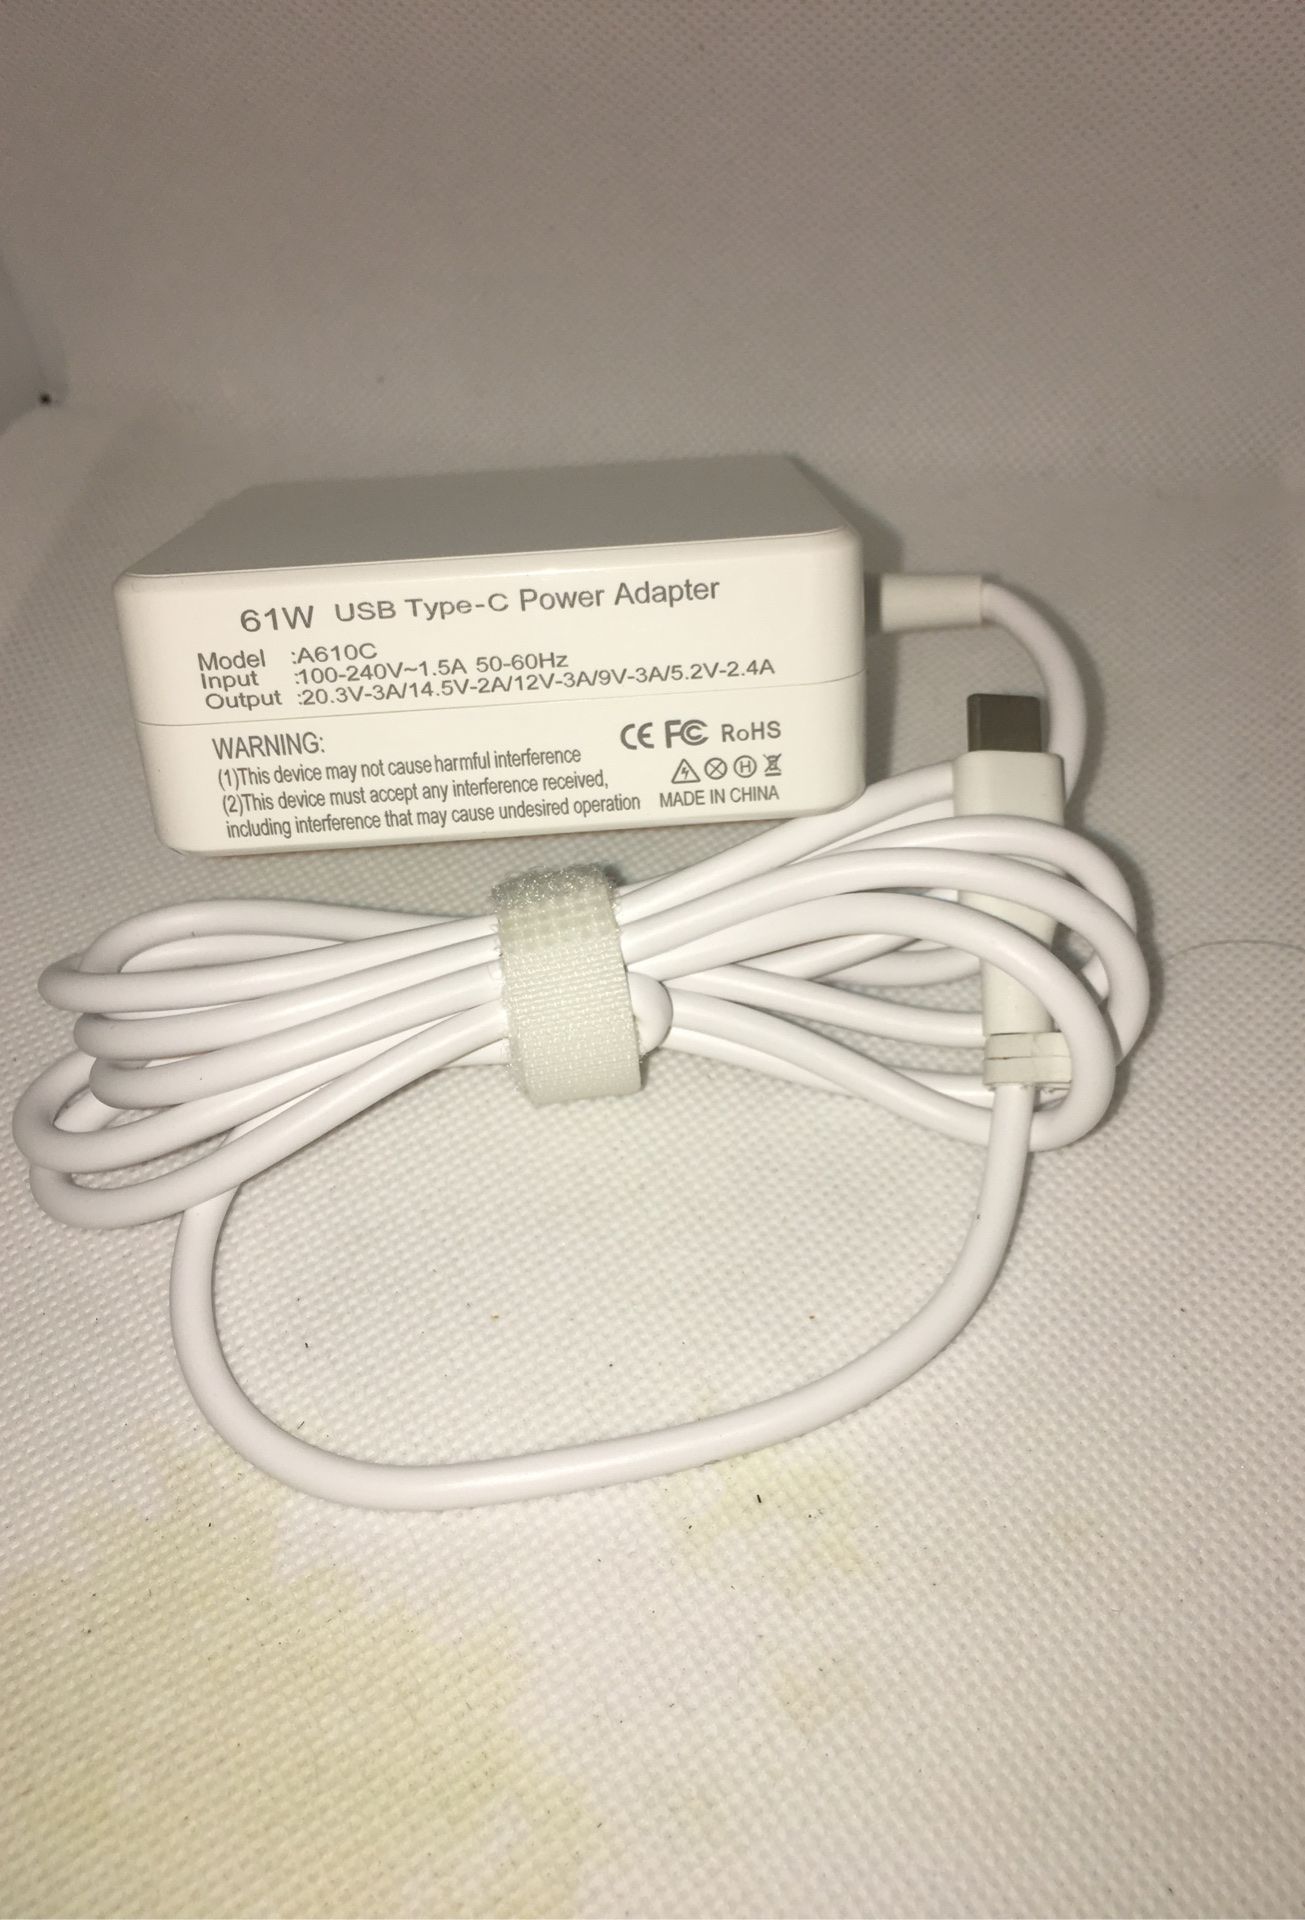 61W USB Type C Power Adapter Charger for Apple MacBook/Pro, Lenovo, ASUS, Acer, Dell, Xiaomi Air, Huawei Matebook, HP Spectre, Thinkpad and Any Other